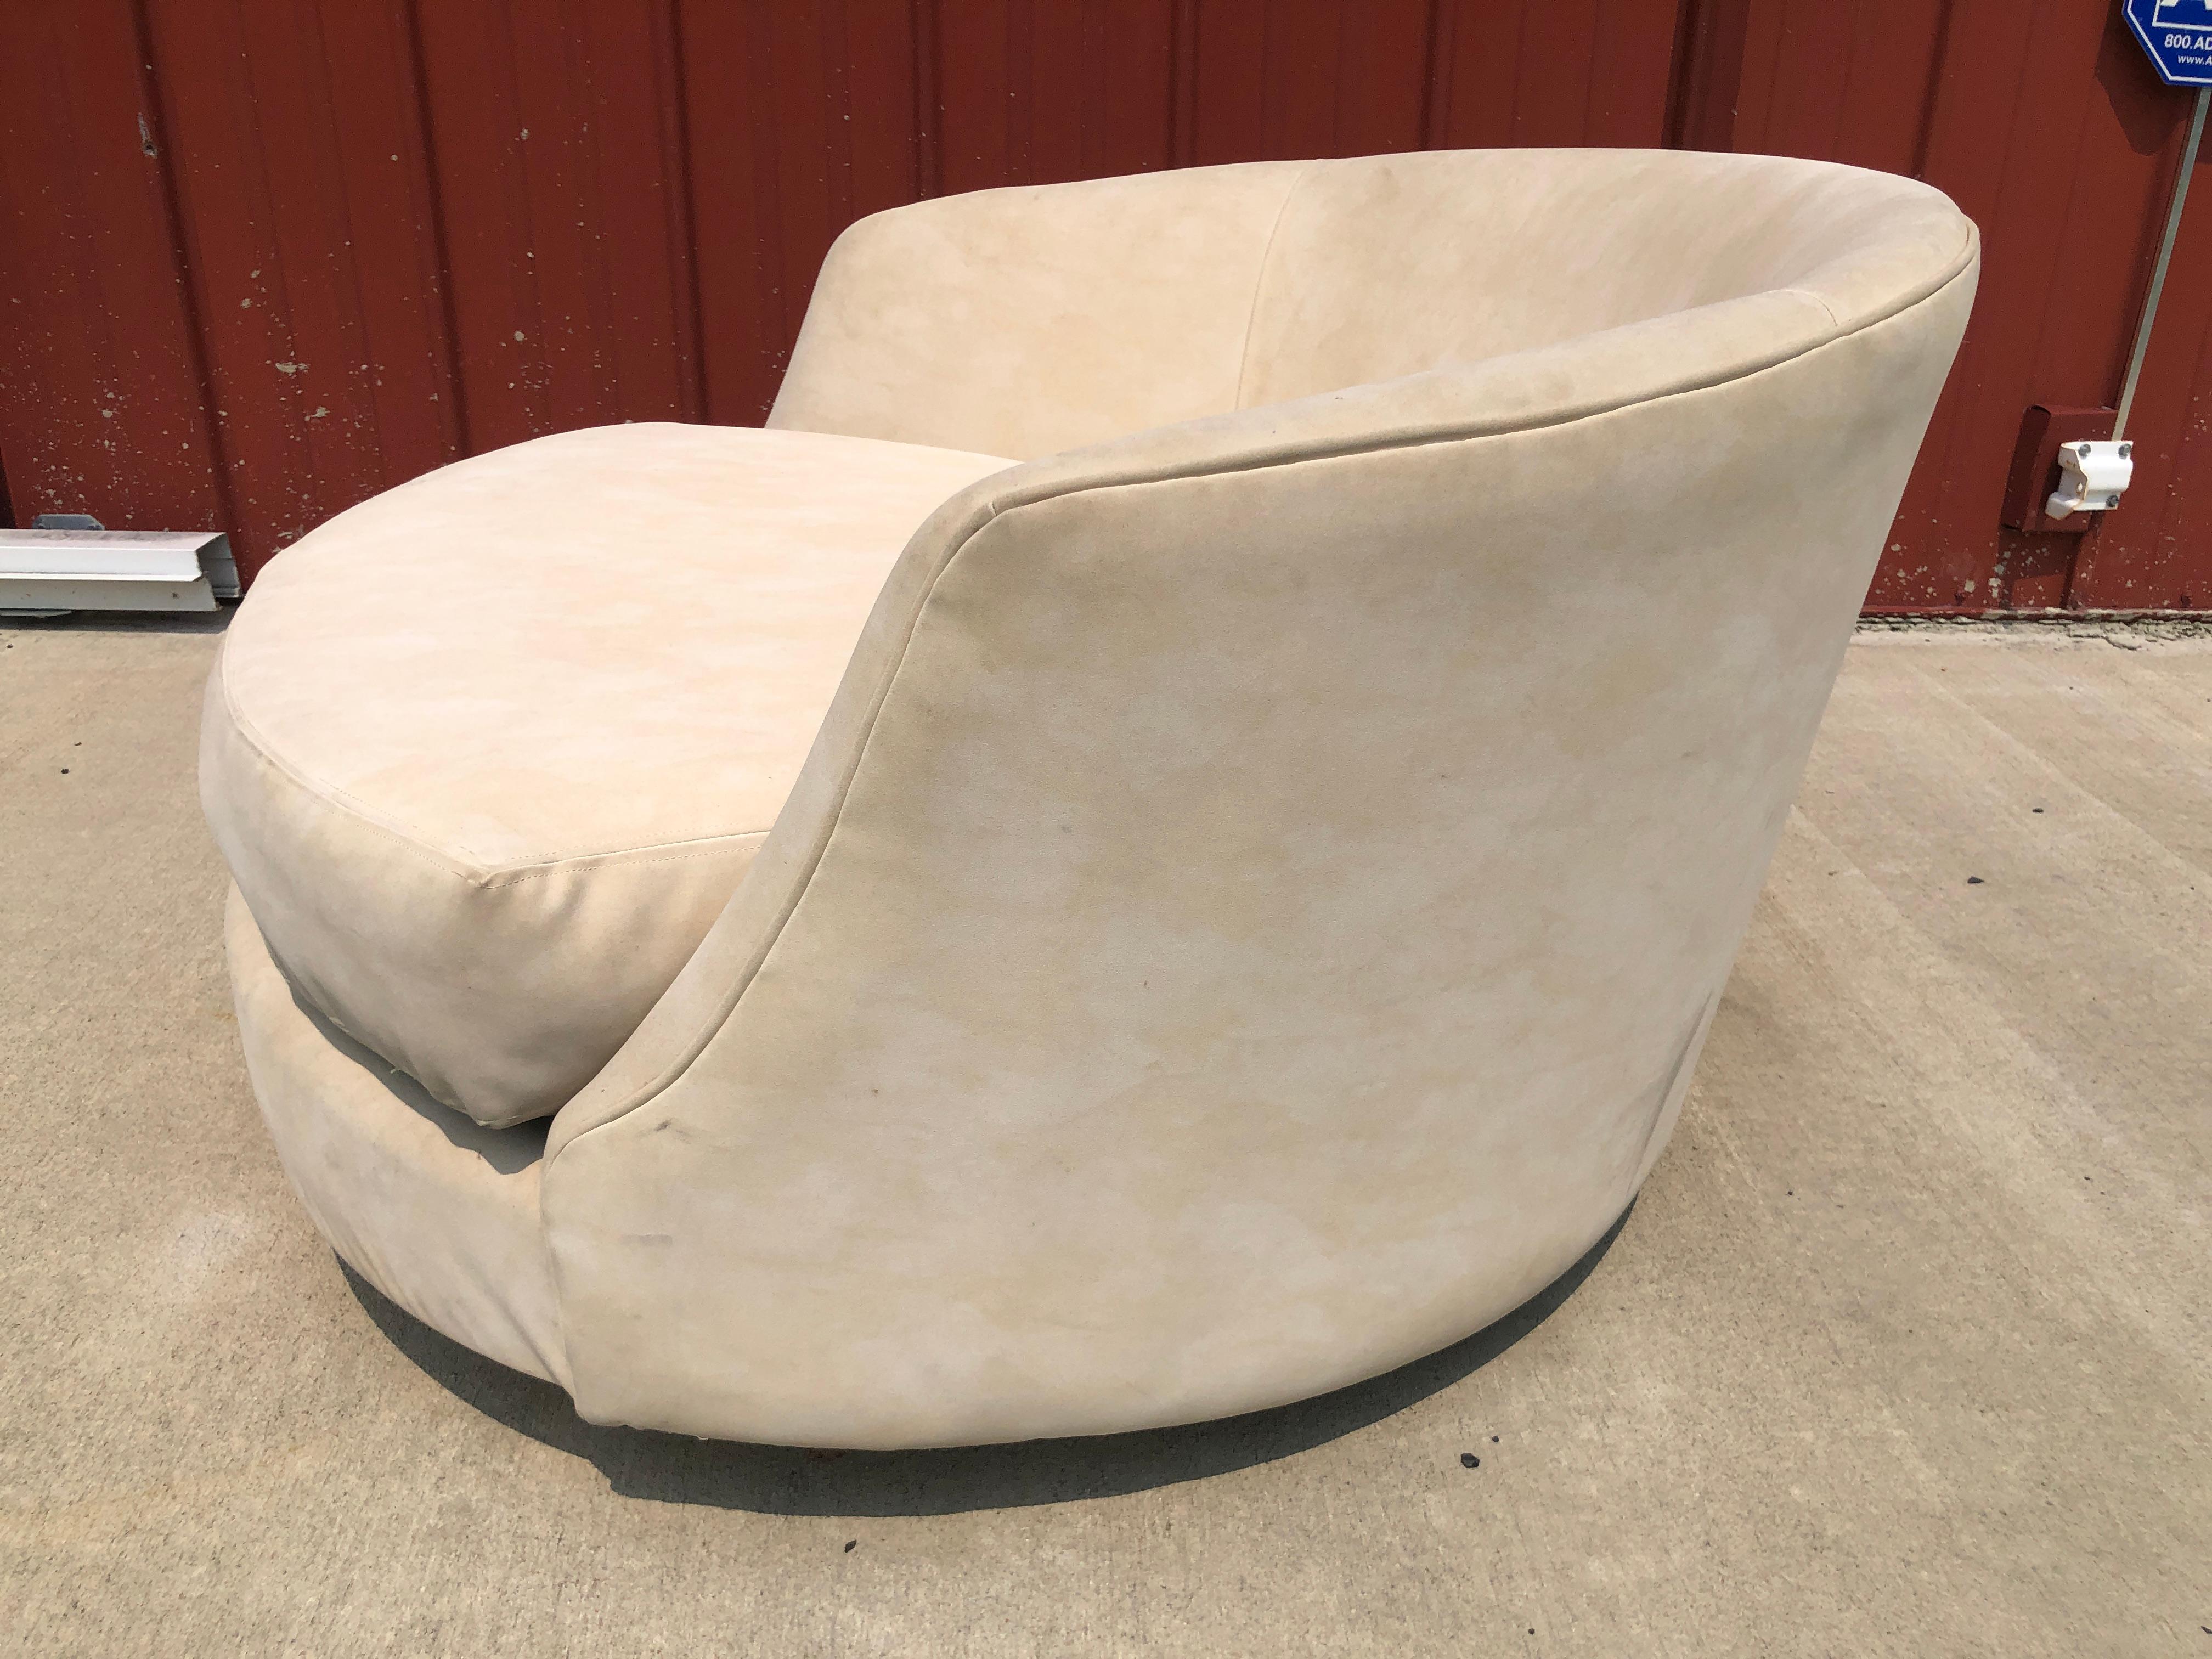 Marvelous Milo Baughman circular swivel lounge chair. This piece retains its original ultra-suede which does show some stains and wear. We do recommend reupholstery but could possibly be cleaned. It measures 25.5”t x 42” in diameter with a seat